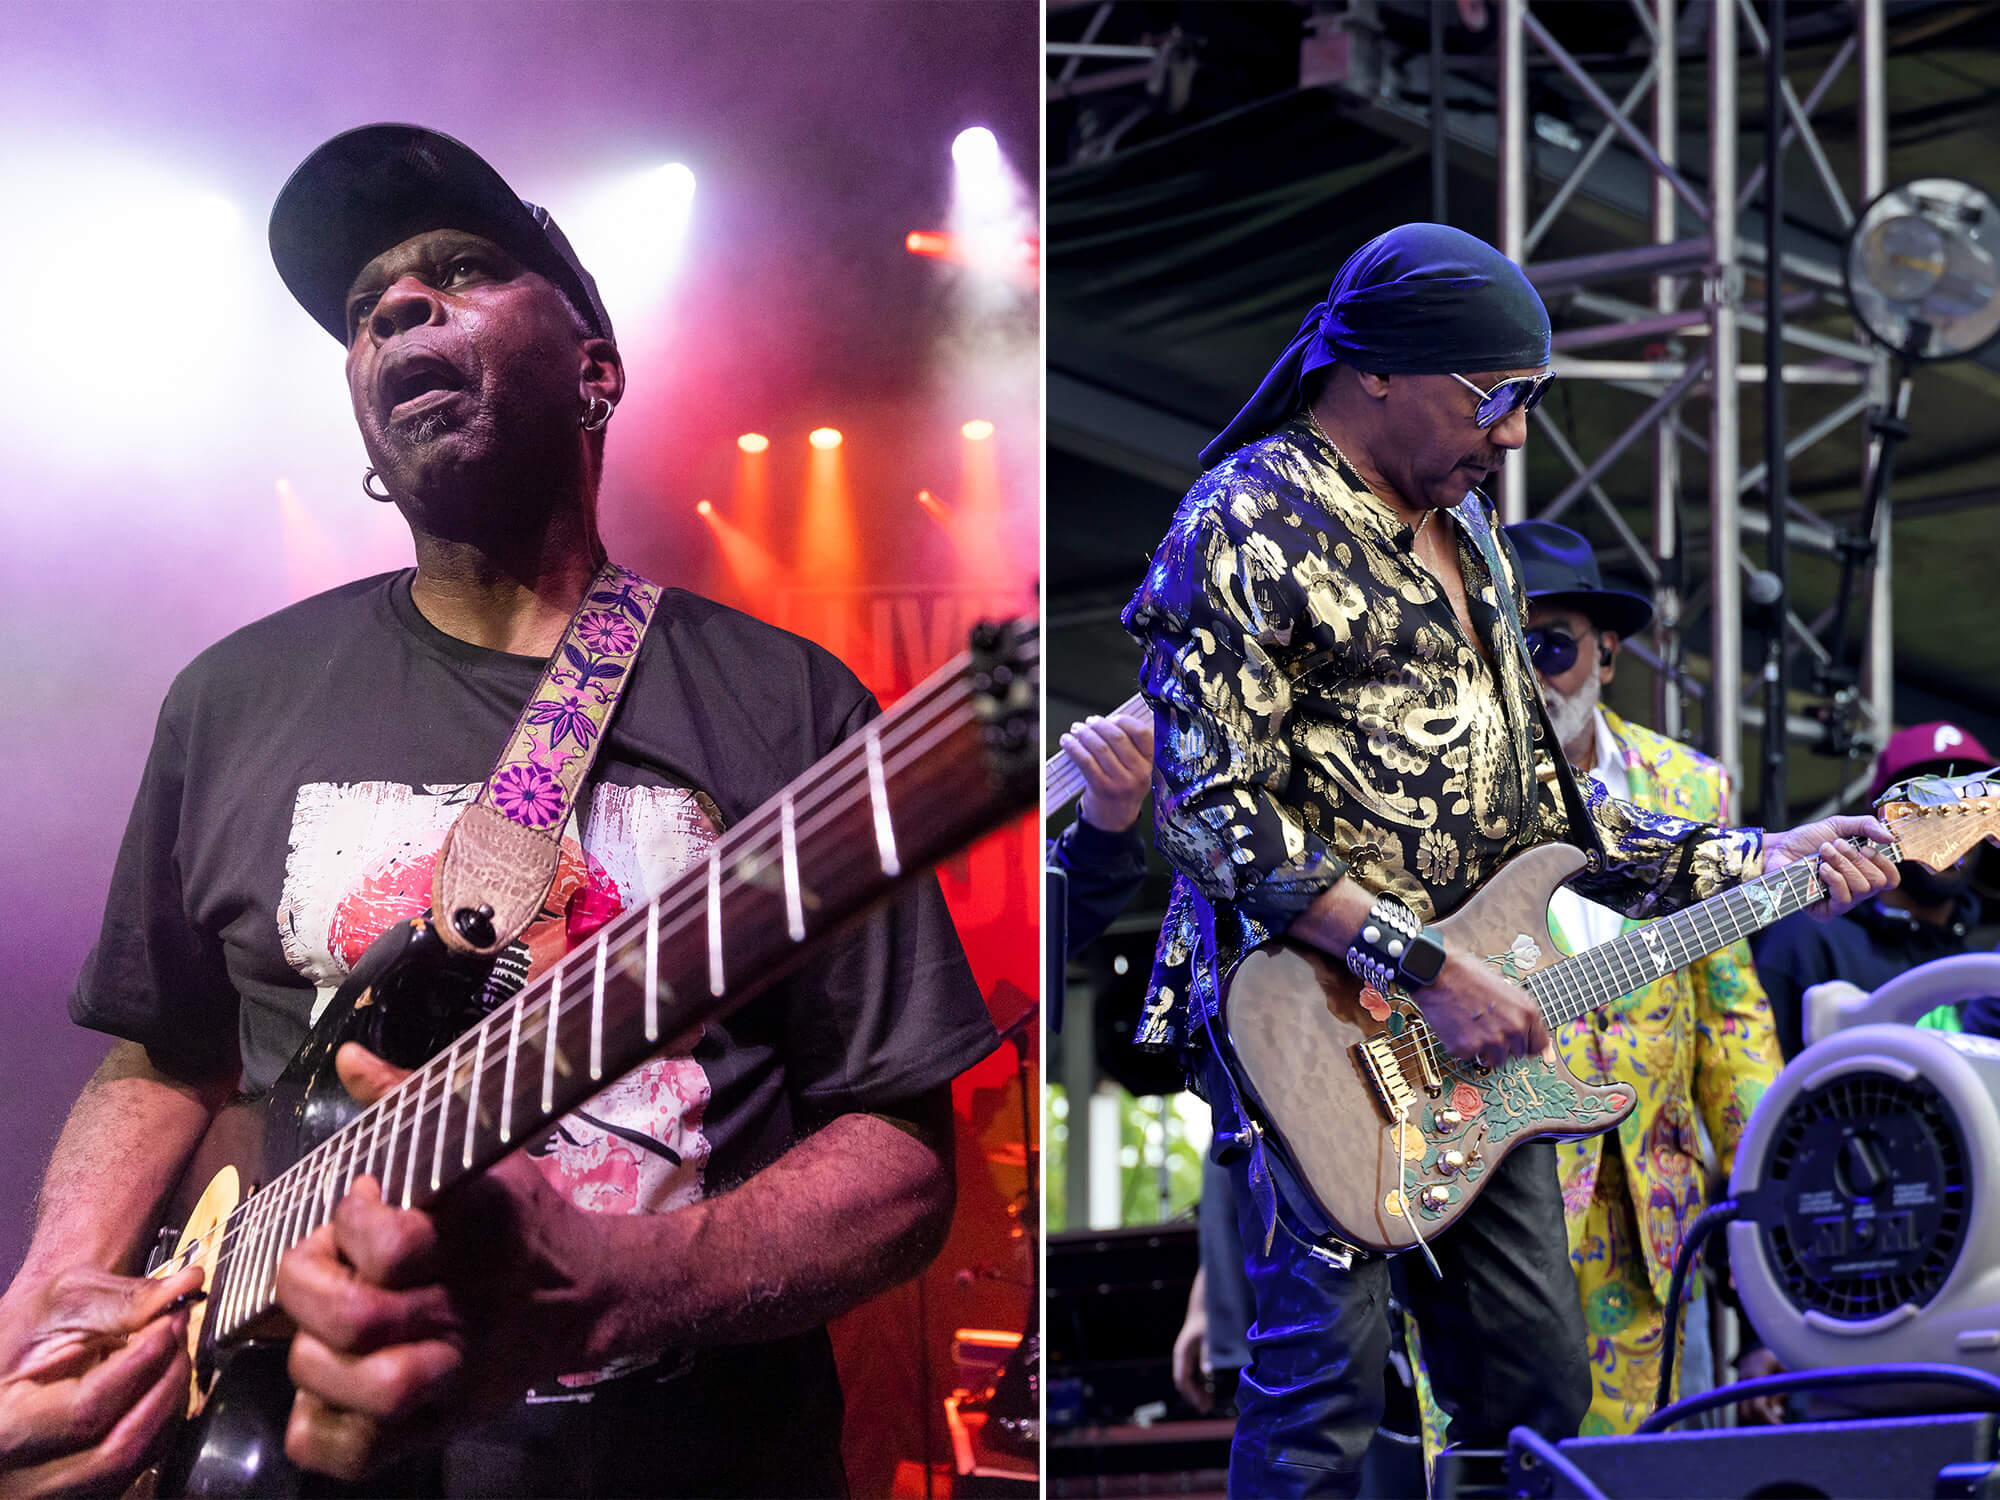 Vernon Reid (left) and Ernie Isley (right. Both are on stage and are playing guitar.